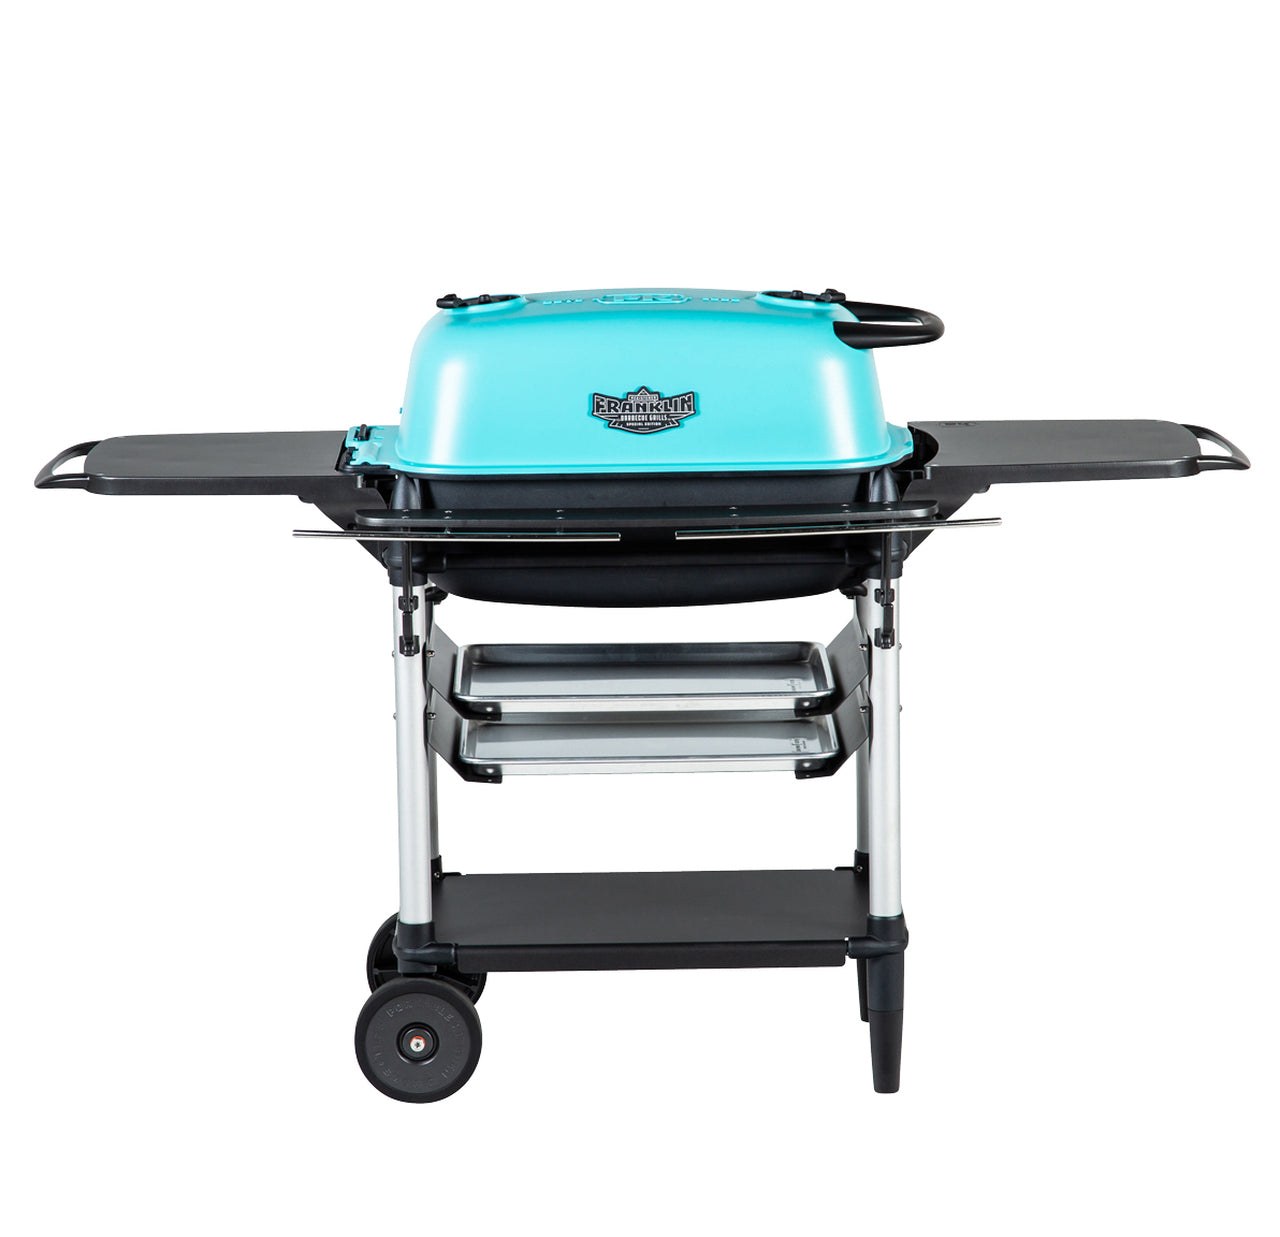 PK GRILLS AARON FRANKLIN EDITION IN TEAL AND COAL (PK300-AF-TC) - 129573